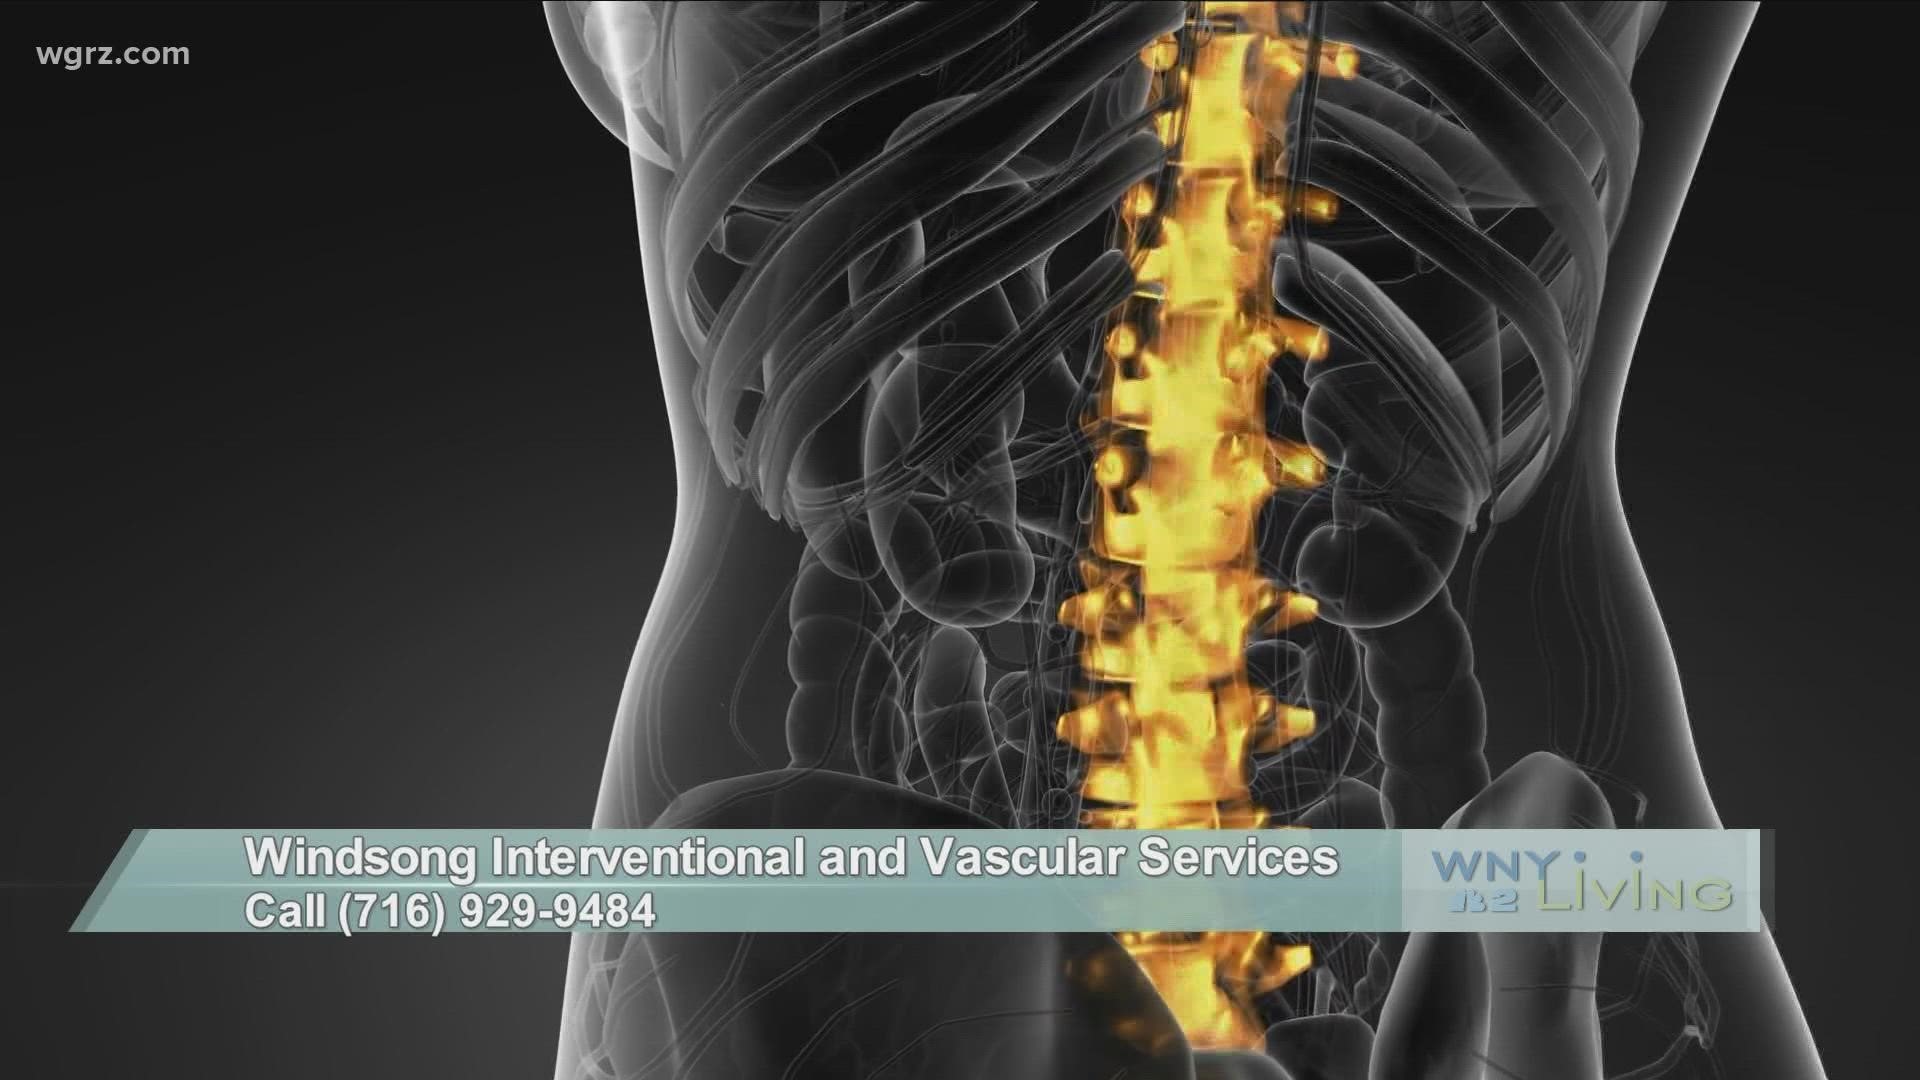 WNY Living - September 18 - Windsong Interventional & Vascular Services (THIS VIDEO IS SPONSORED BY WINDSONG INTERVENTIONAL & VASCULAR SERVICES)